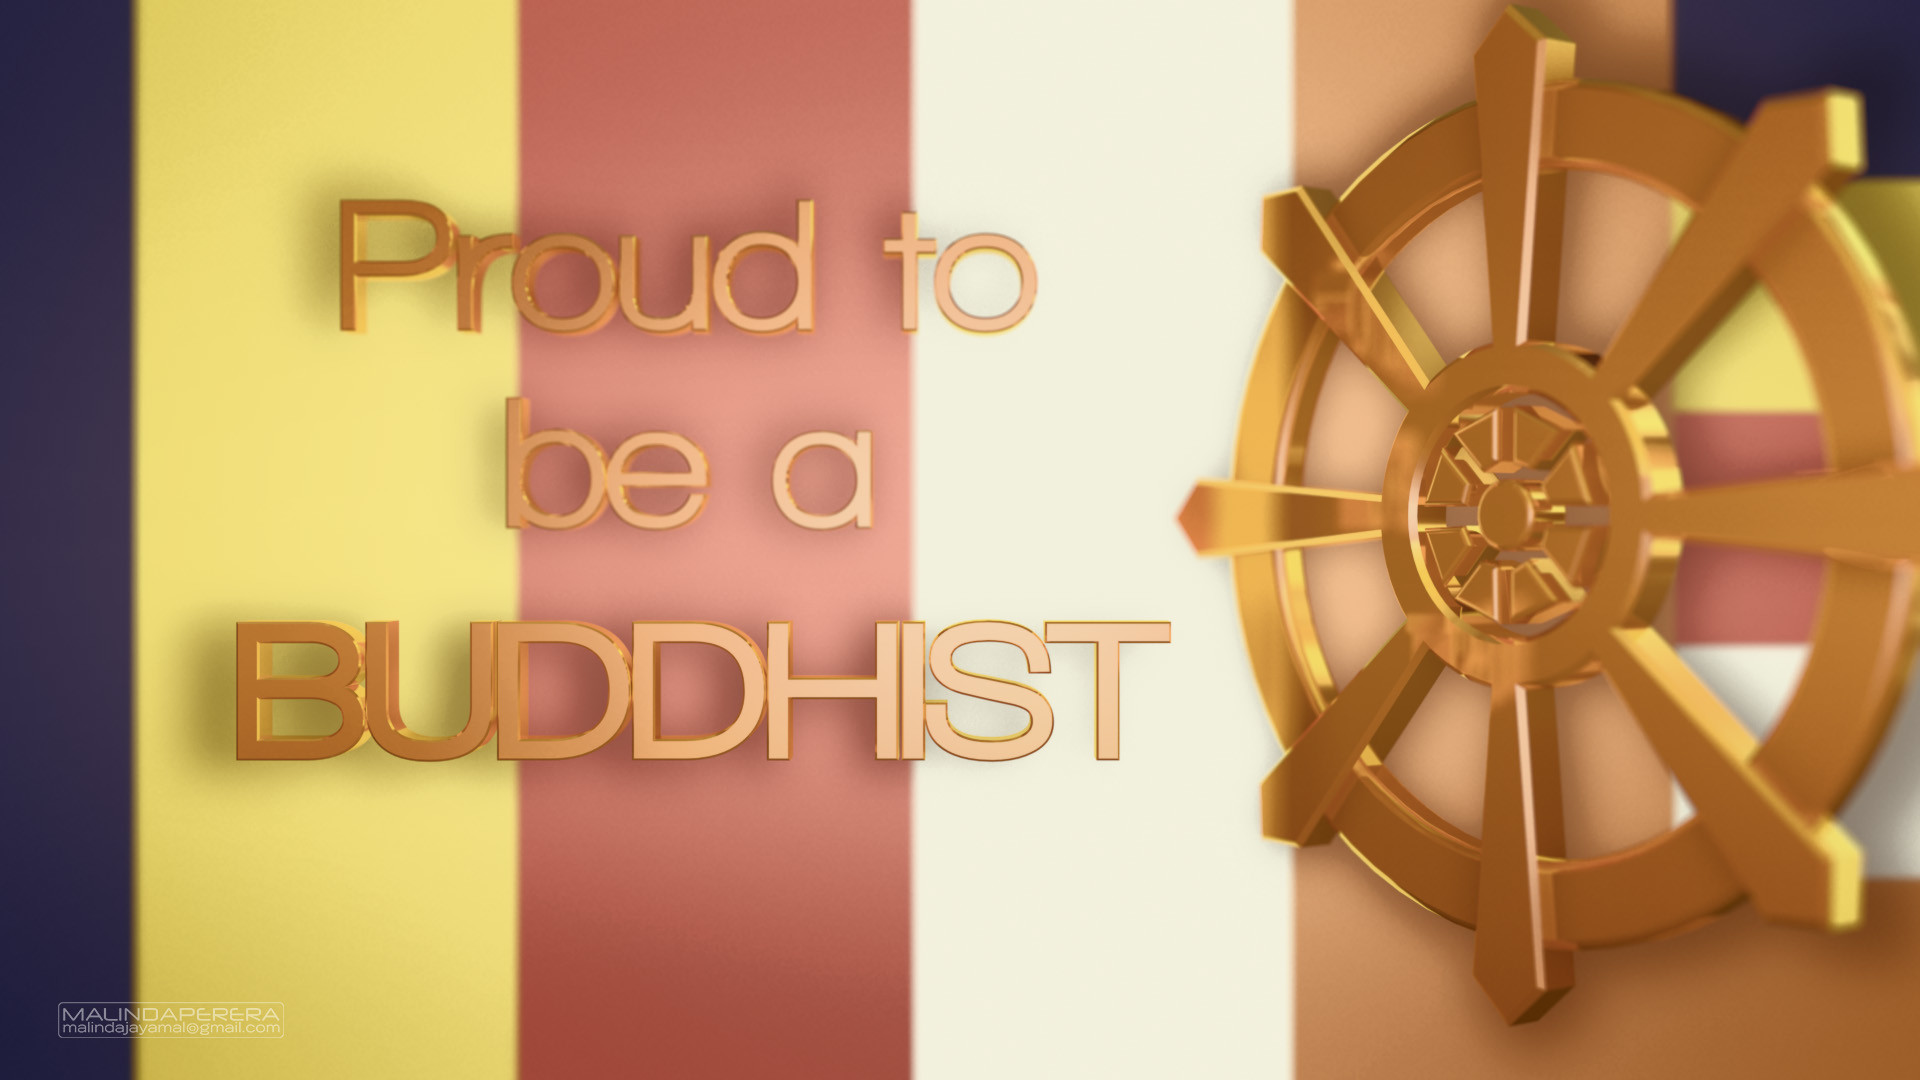 1920x1080 Proud to be a Buddhist